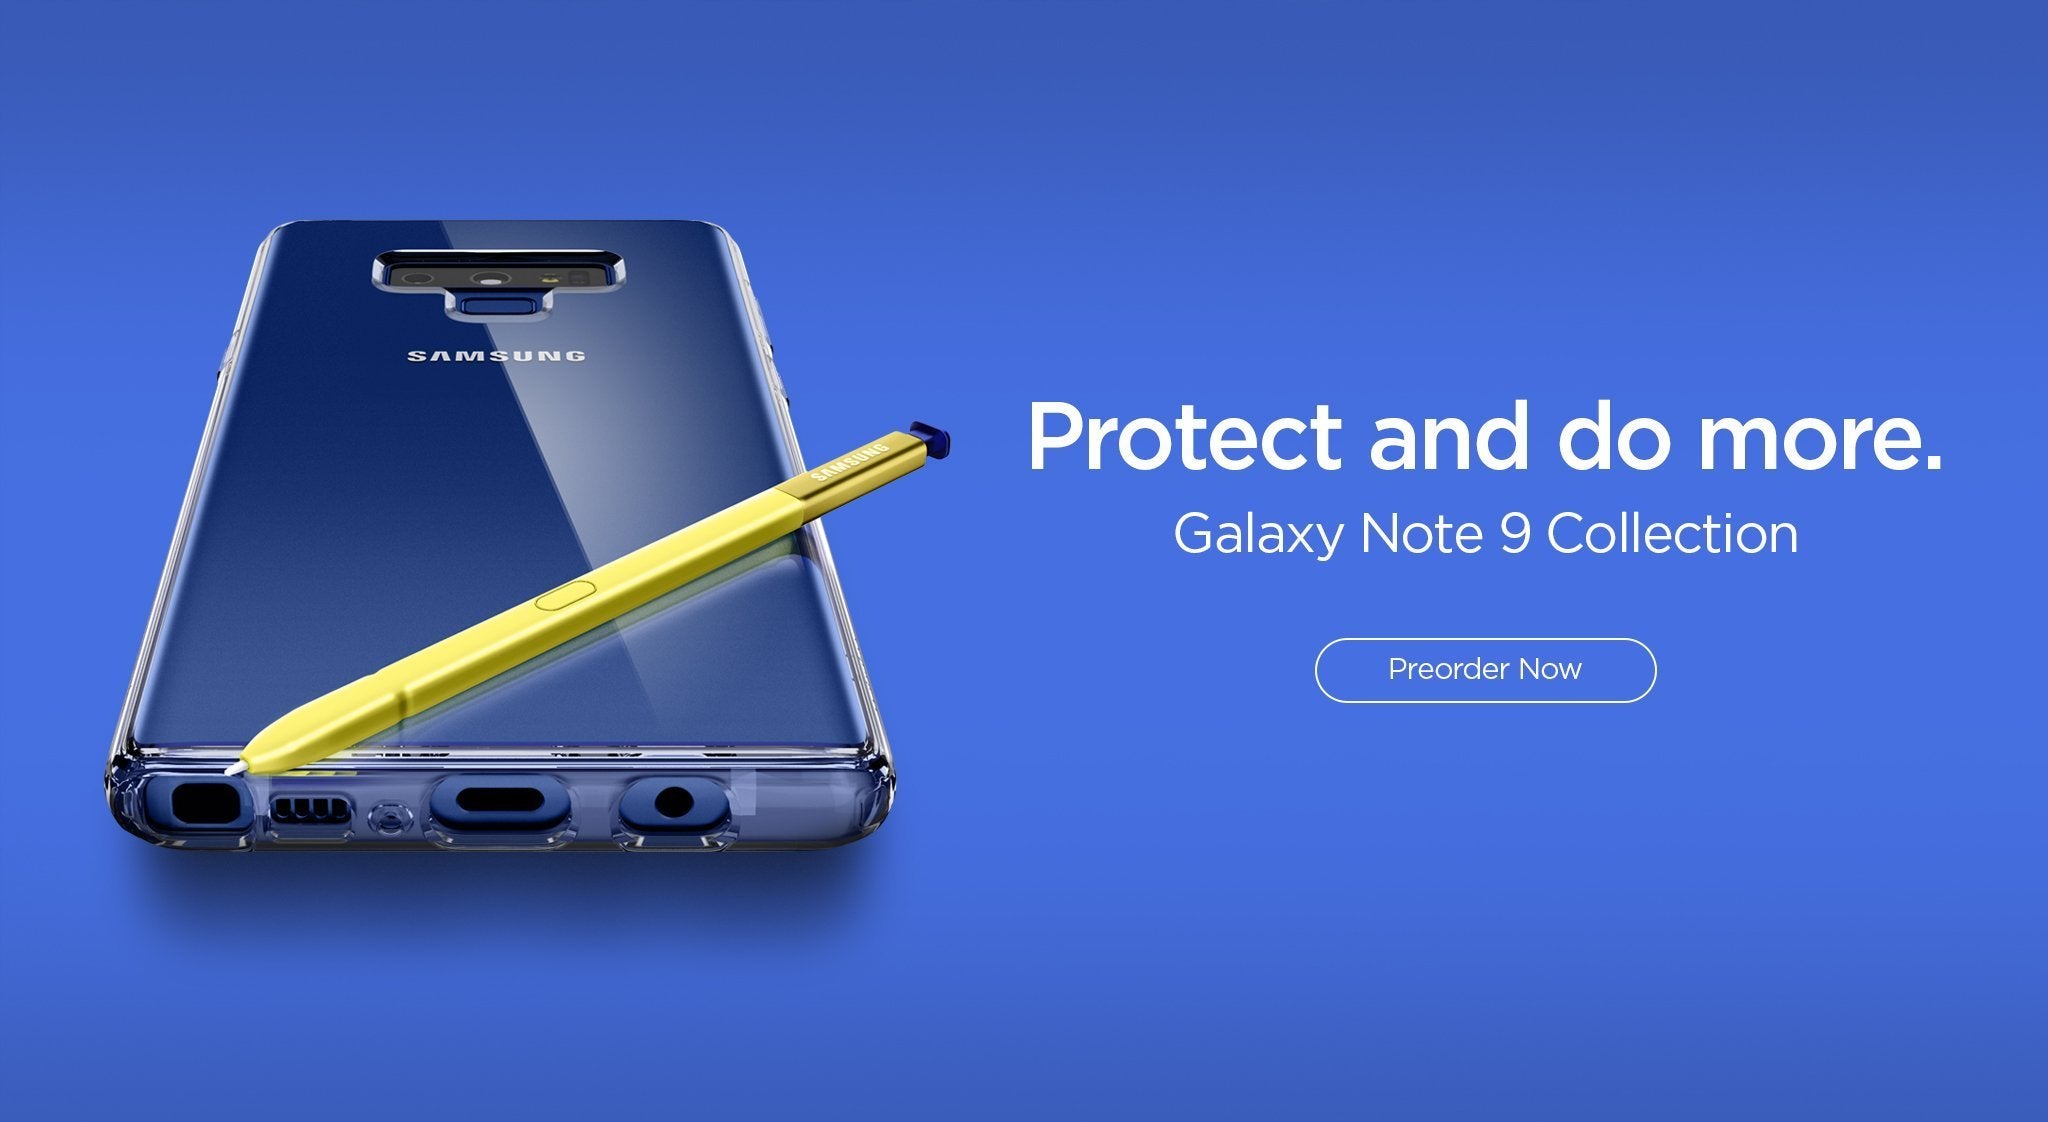 Best Galaxy Note 9 cases and covers you can get right now